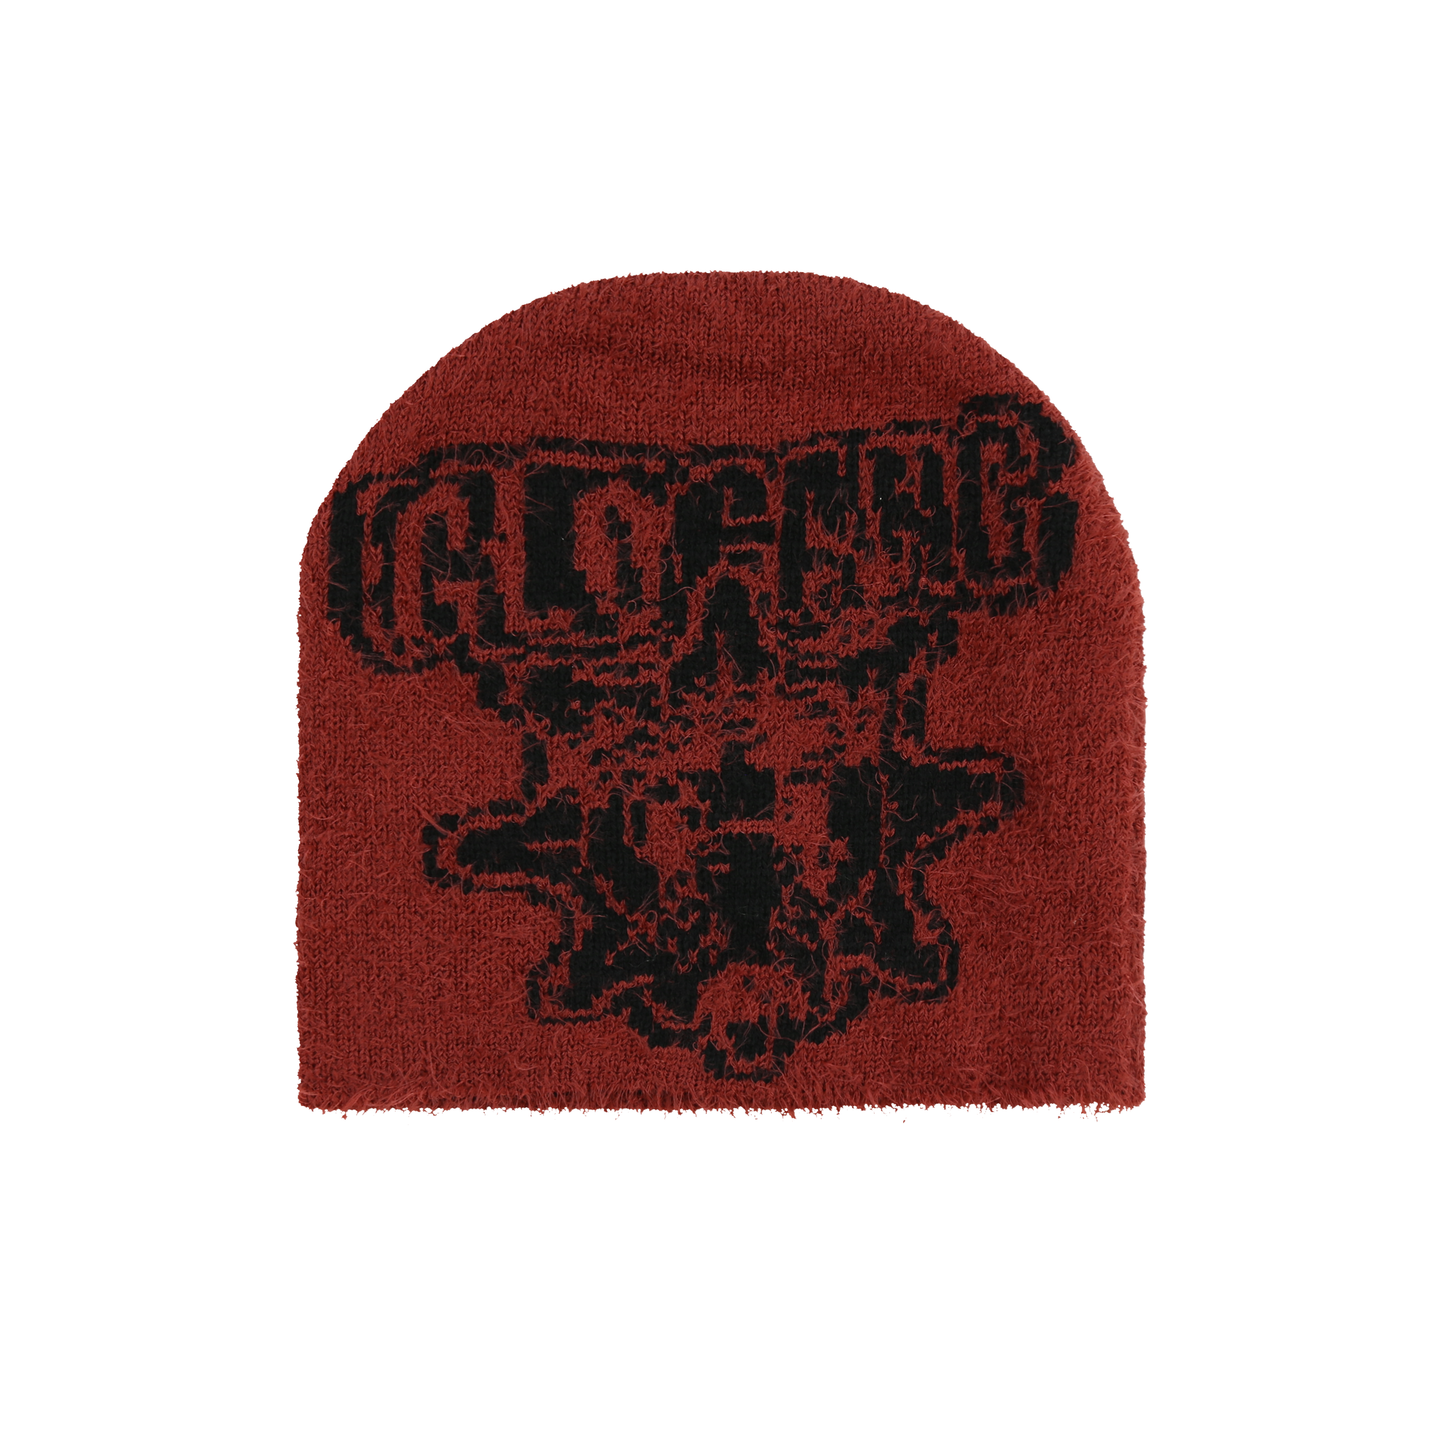 Almighty Beanie (Brown/Black)